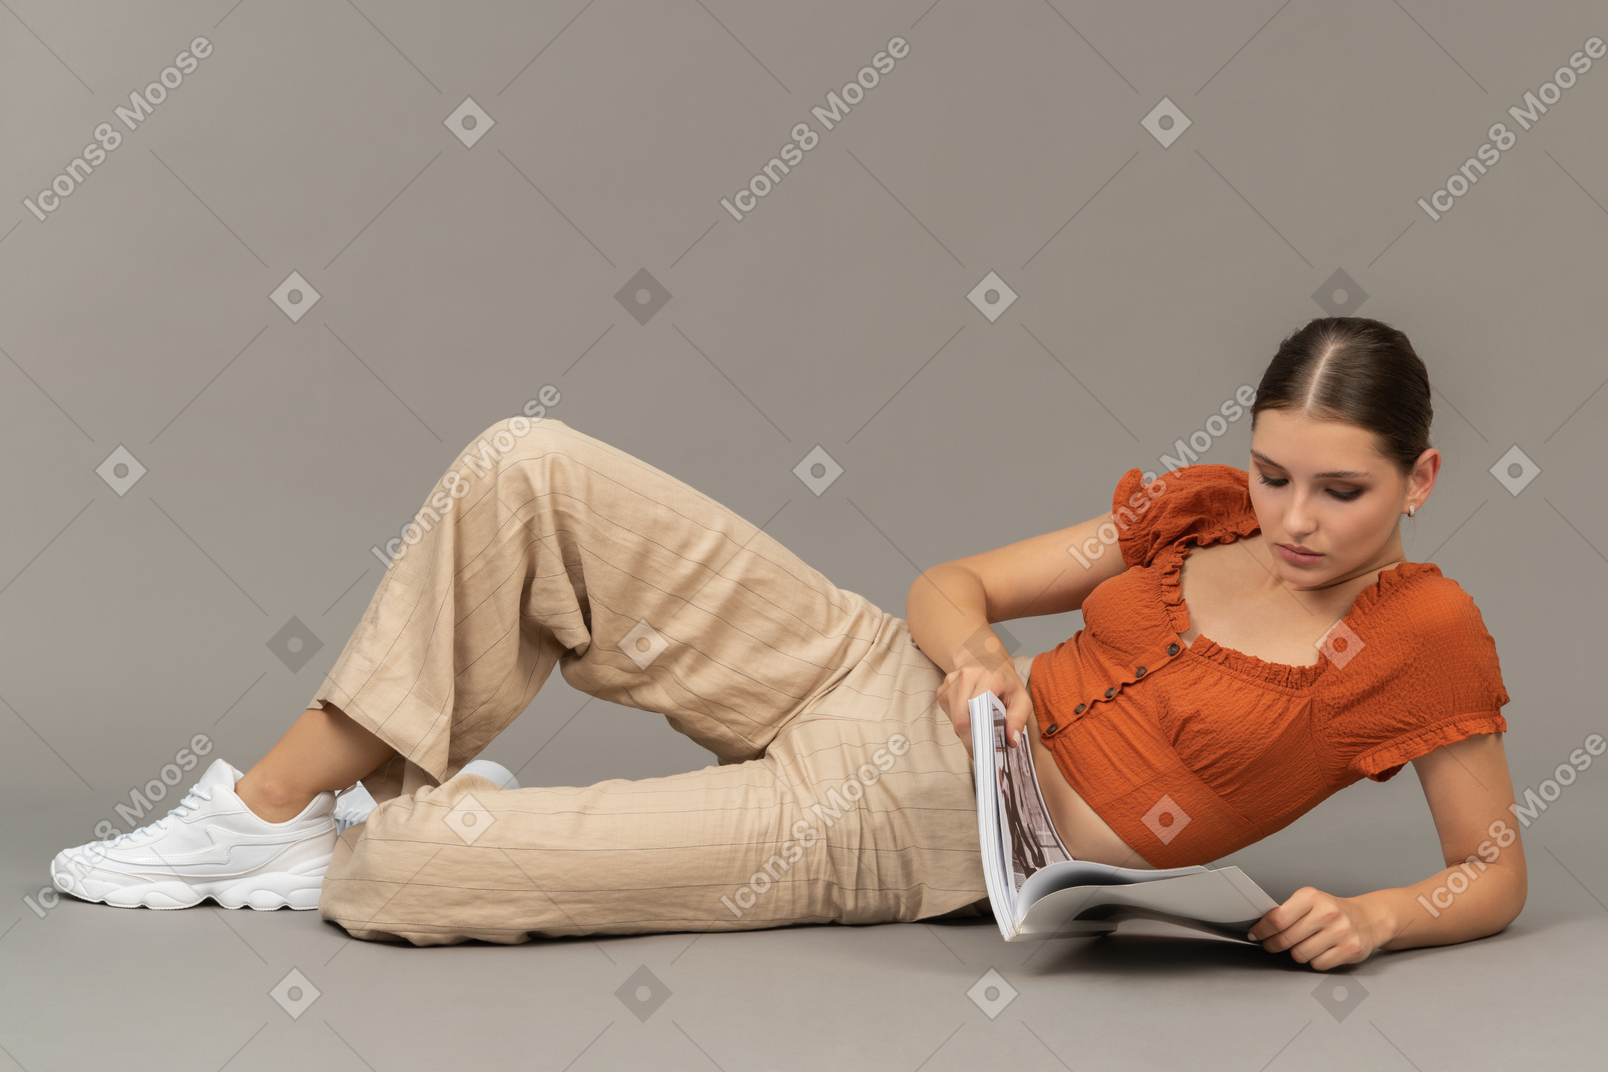 Young woman reading on the floor